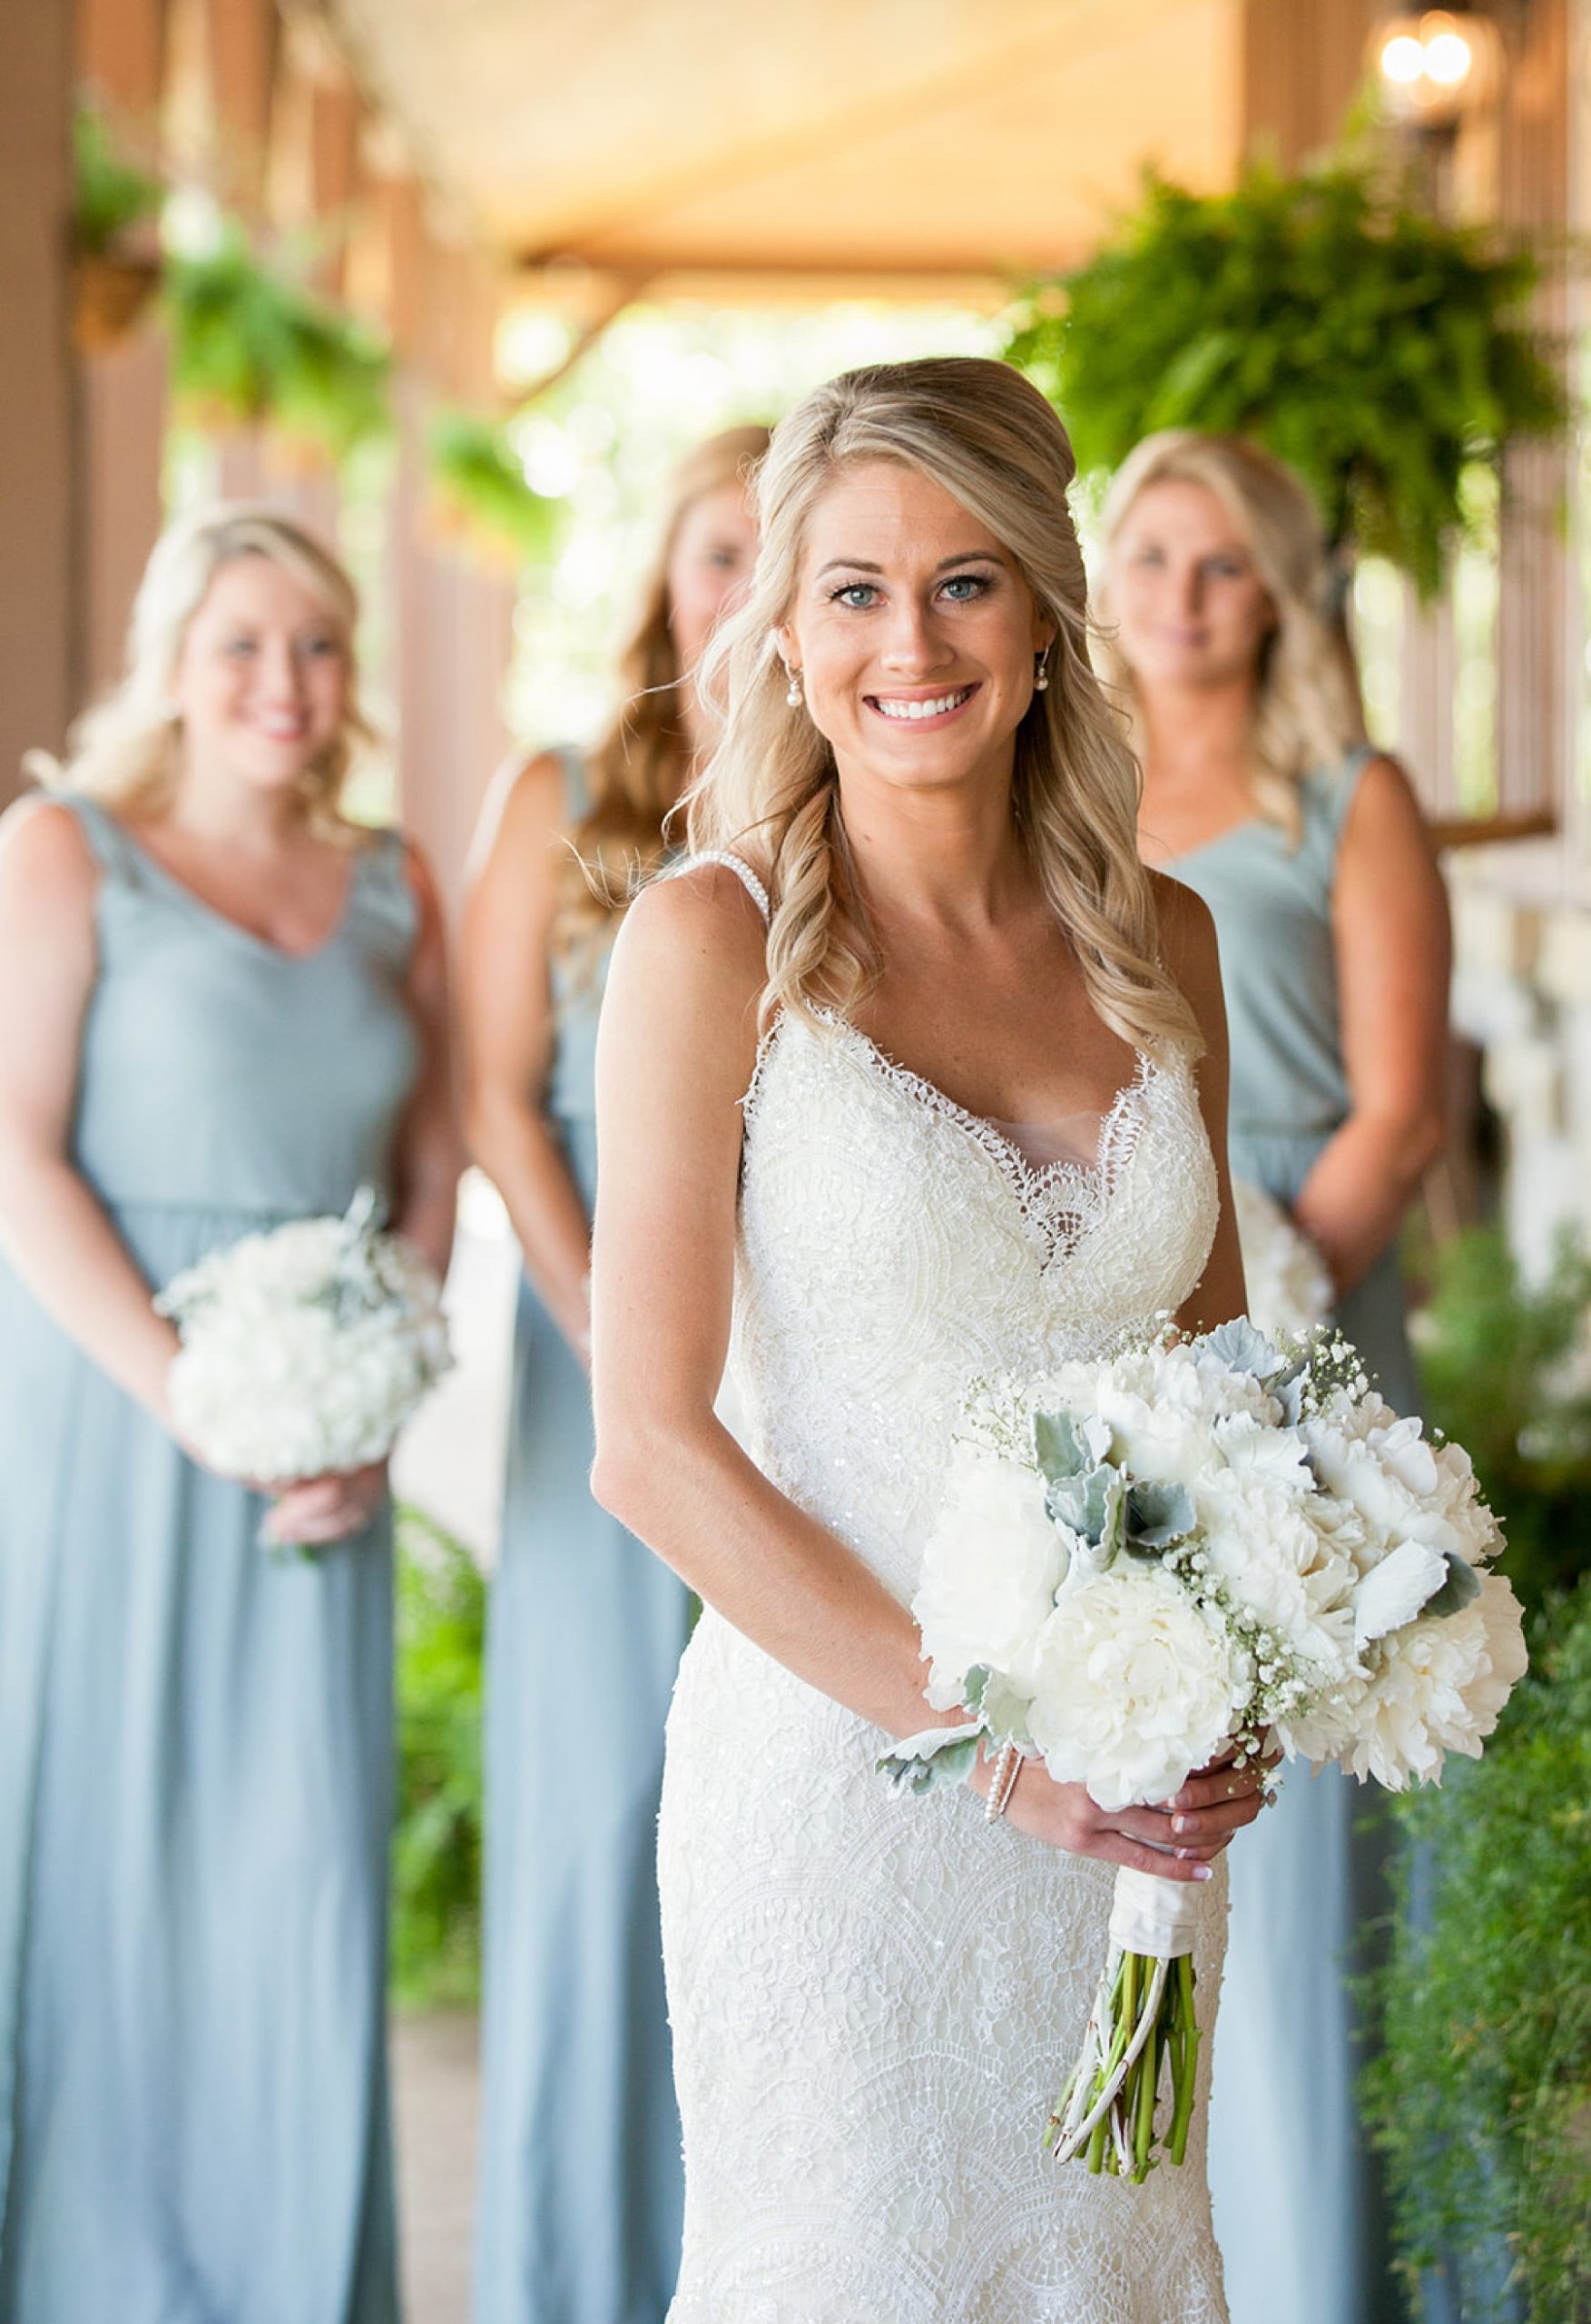 Bride standing with bridesmaids in dusty blue in the background